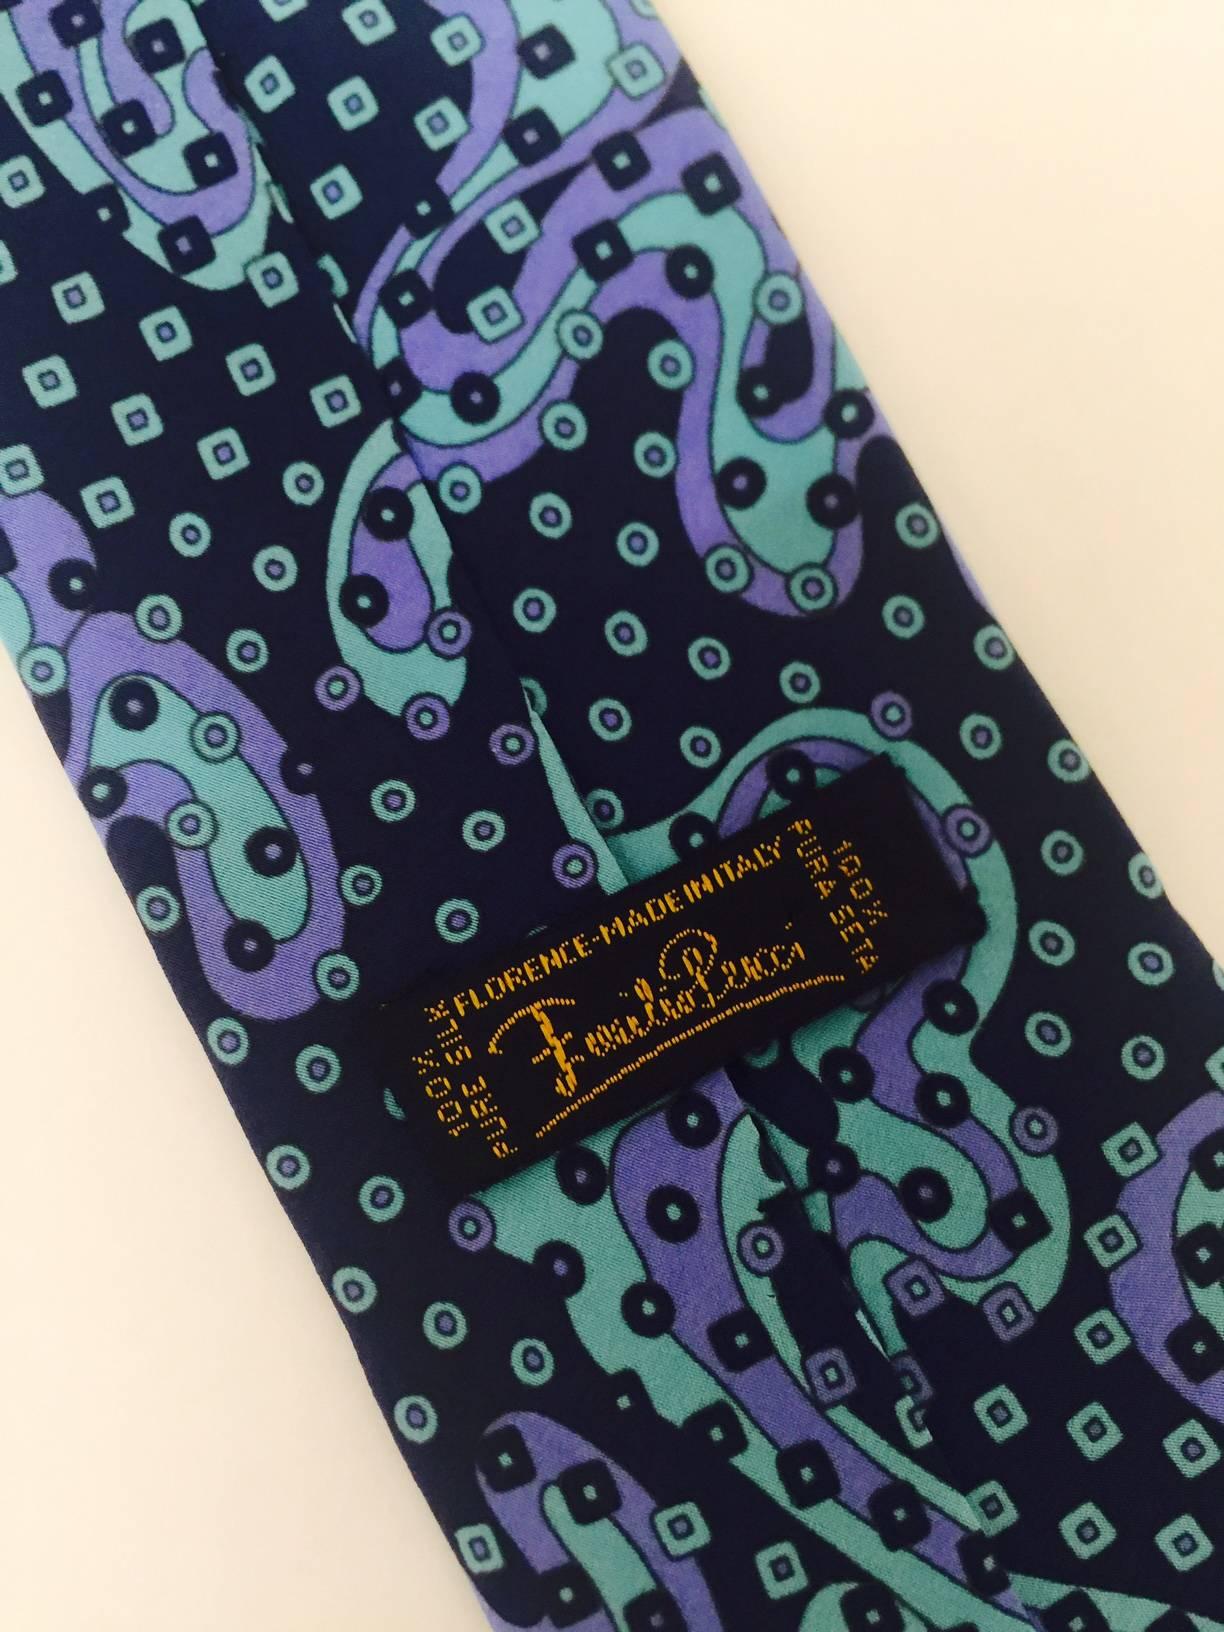 Always known for outstanding prints, this tie has all the elements of the fab psychedelic era in tones of blue on blue. Great addition for the Pucci collector.   54 inches long, 3.125 inches wide. 1970's